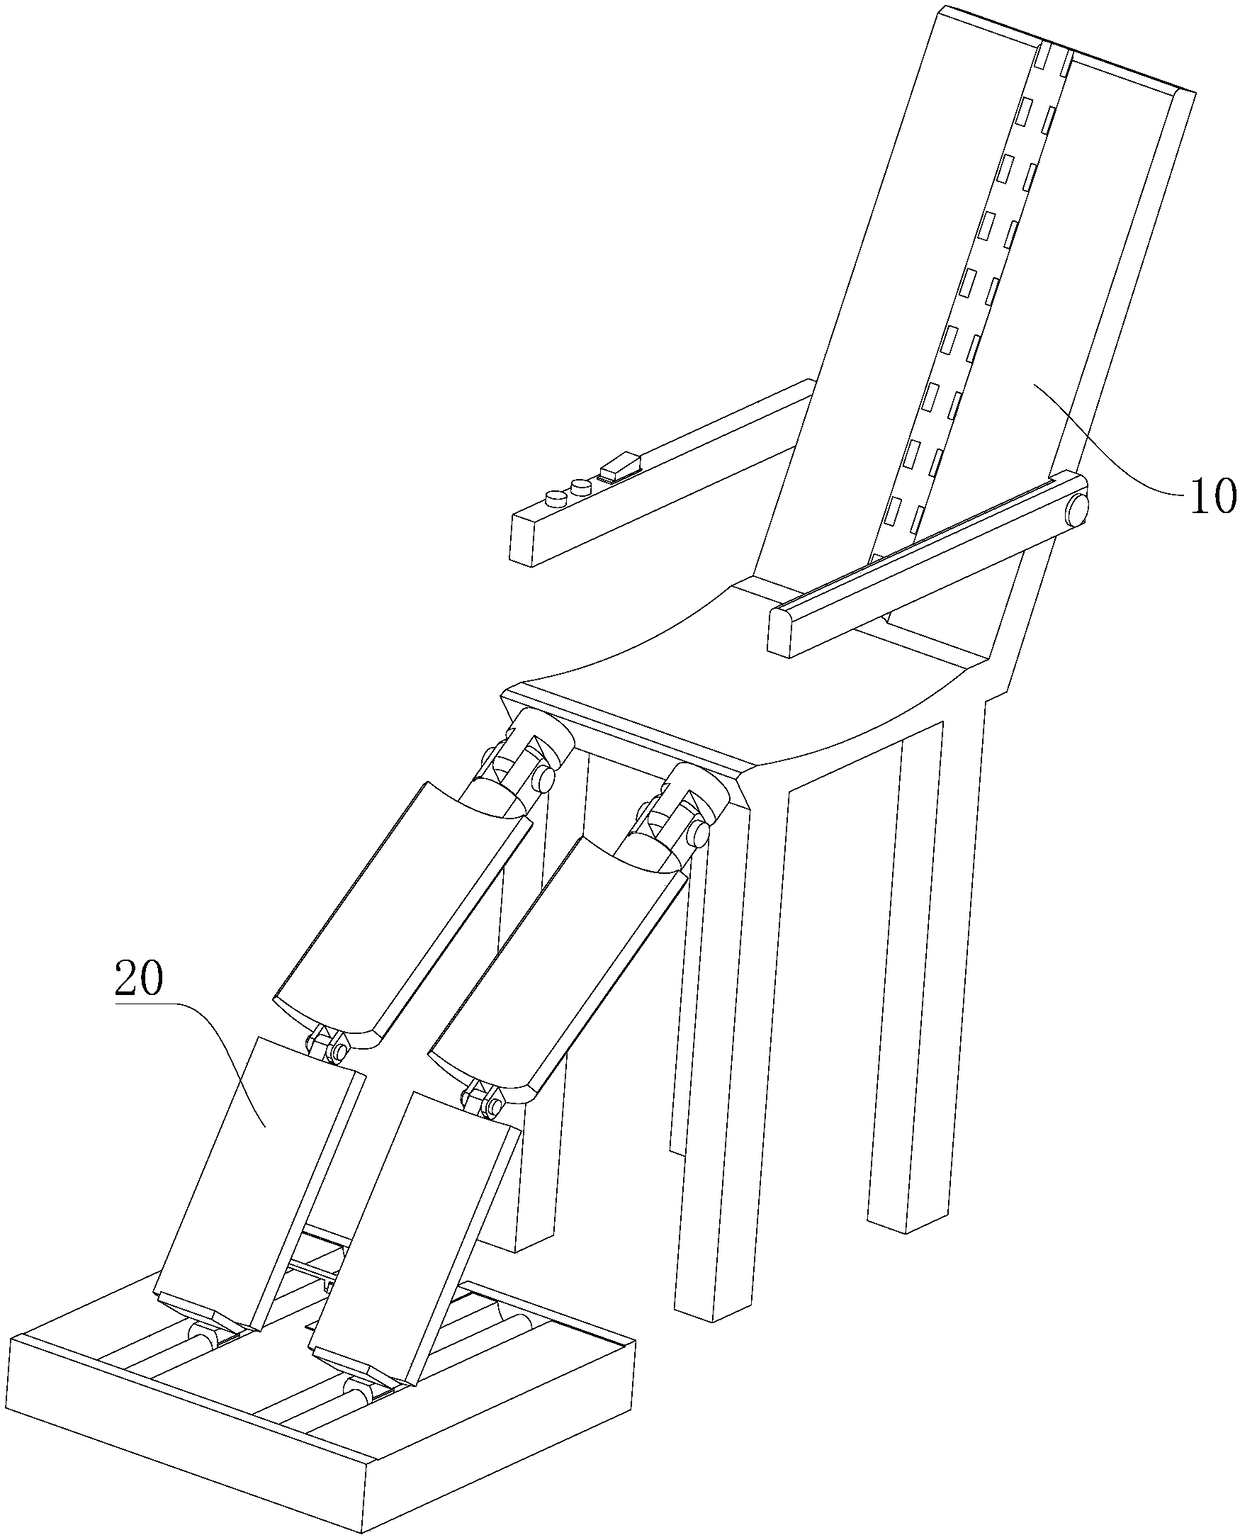 Leg rehabilitation physical therapy device for orthopedic treatment